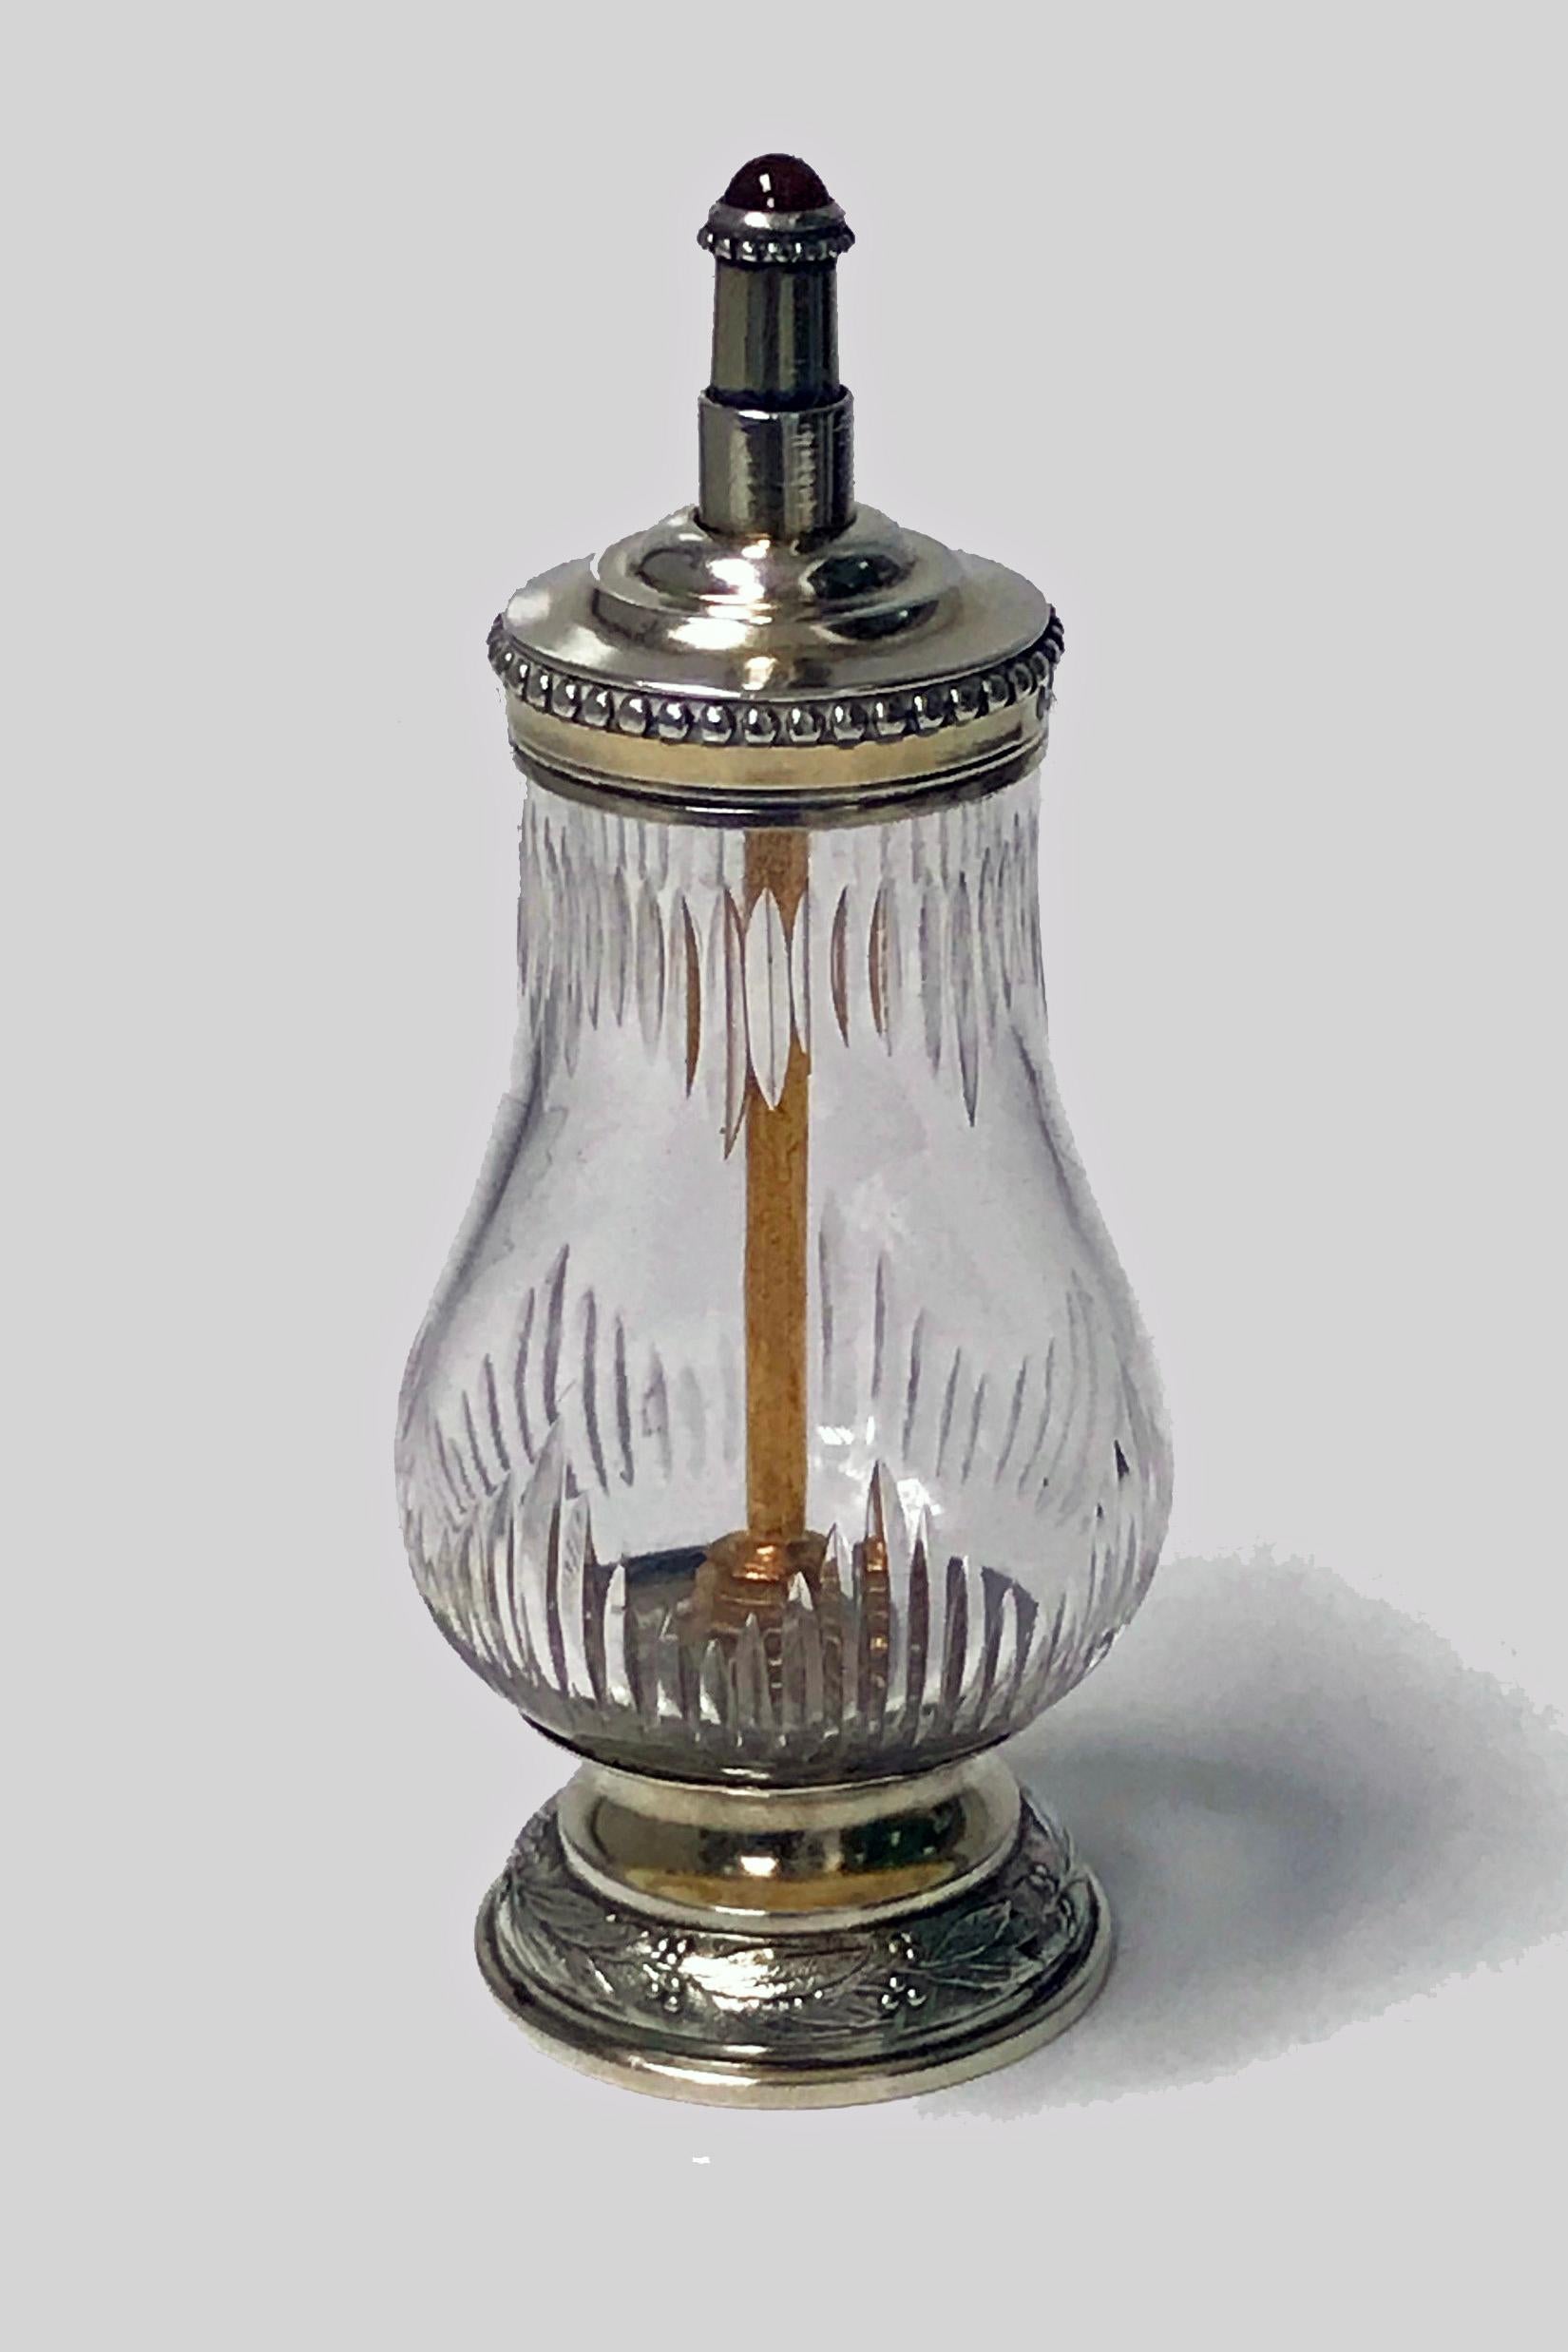 Unusual Antique silver vermeil glass Pepper Grinder, Sampson Mordan import marks, London 1901. The grinder on round dome base, the surround with trailing leaf berry foliage, the glass container of baluster shape with upper and lower surrounds of